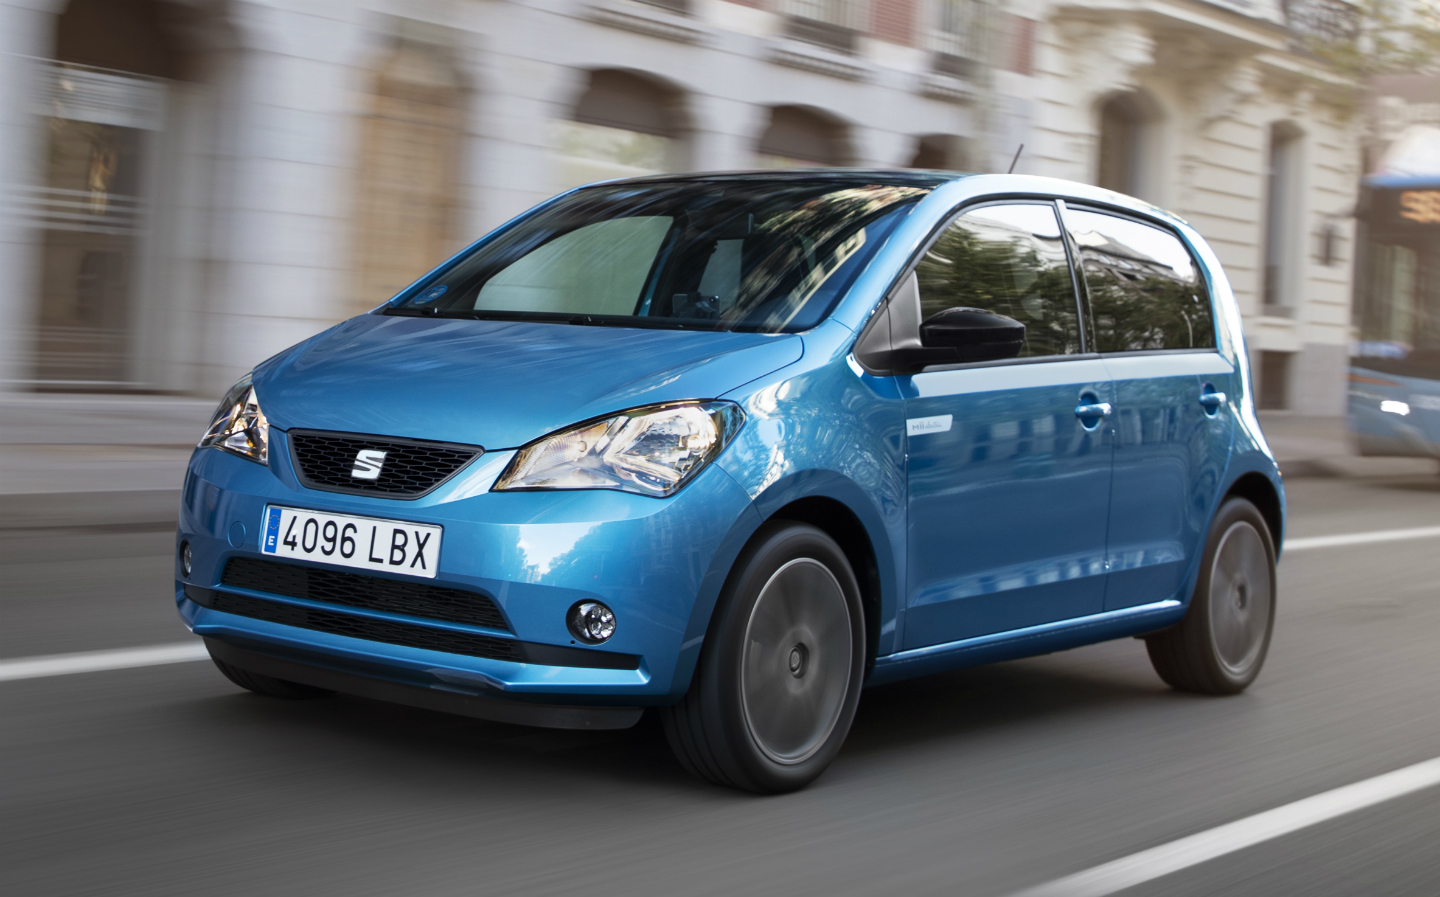 https://www.driving.co.uk/wp-content/uploads/sites/5/2019/11/2020-Seat-Mii-Electric-first-drive-review-04.jpg